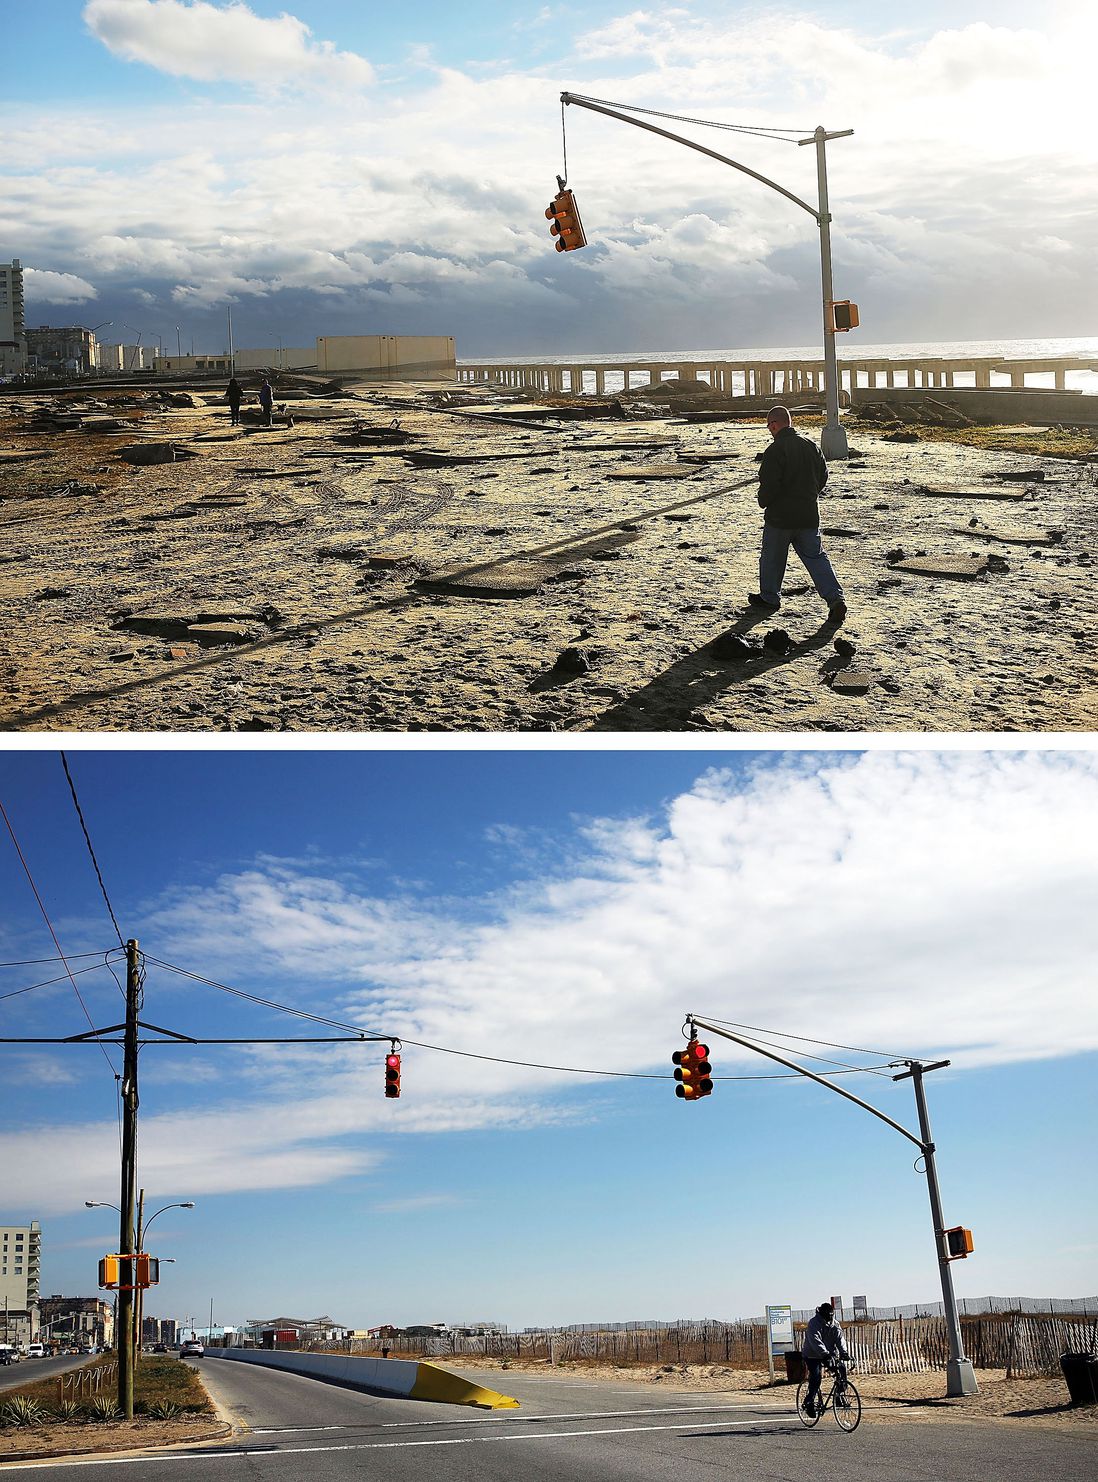 [Top] A man walks by the remains of part of the historic boardwalk, after large parts of it were washed away during Hurricane Sandy on October 31, 2012 in the Rockaway neighborhood of the Queens borough of New York City. [Bottom] A person rides a bike there on October 23, 2013.